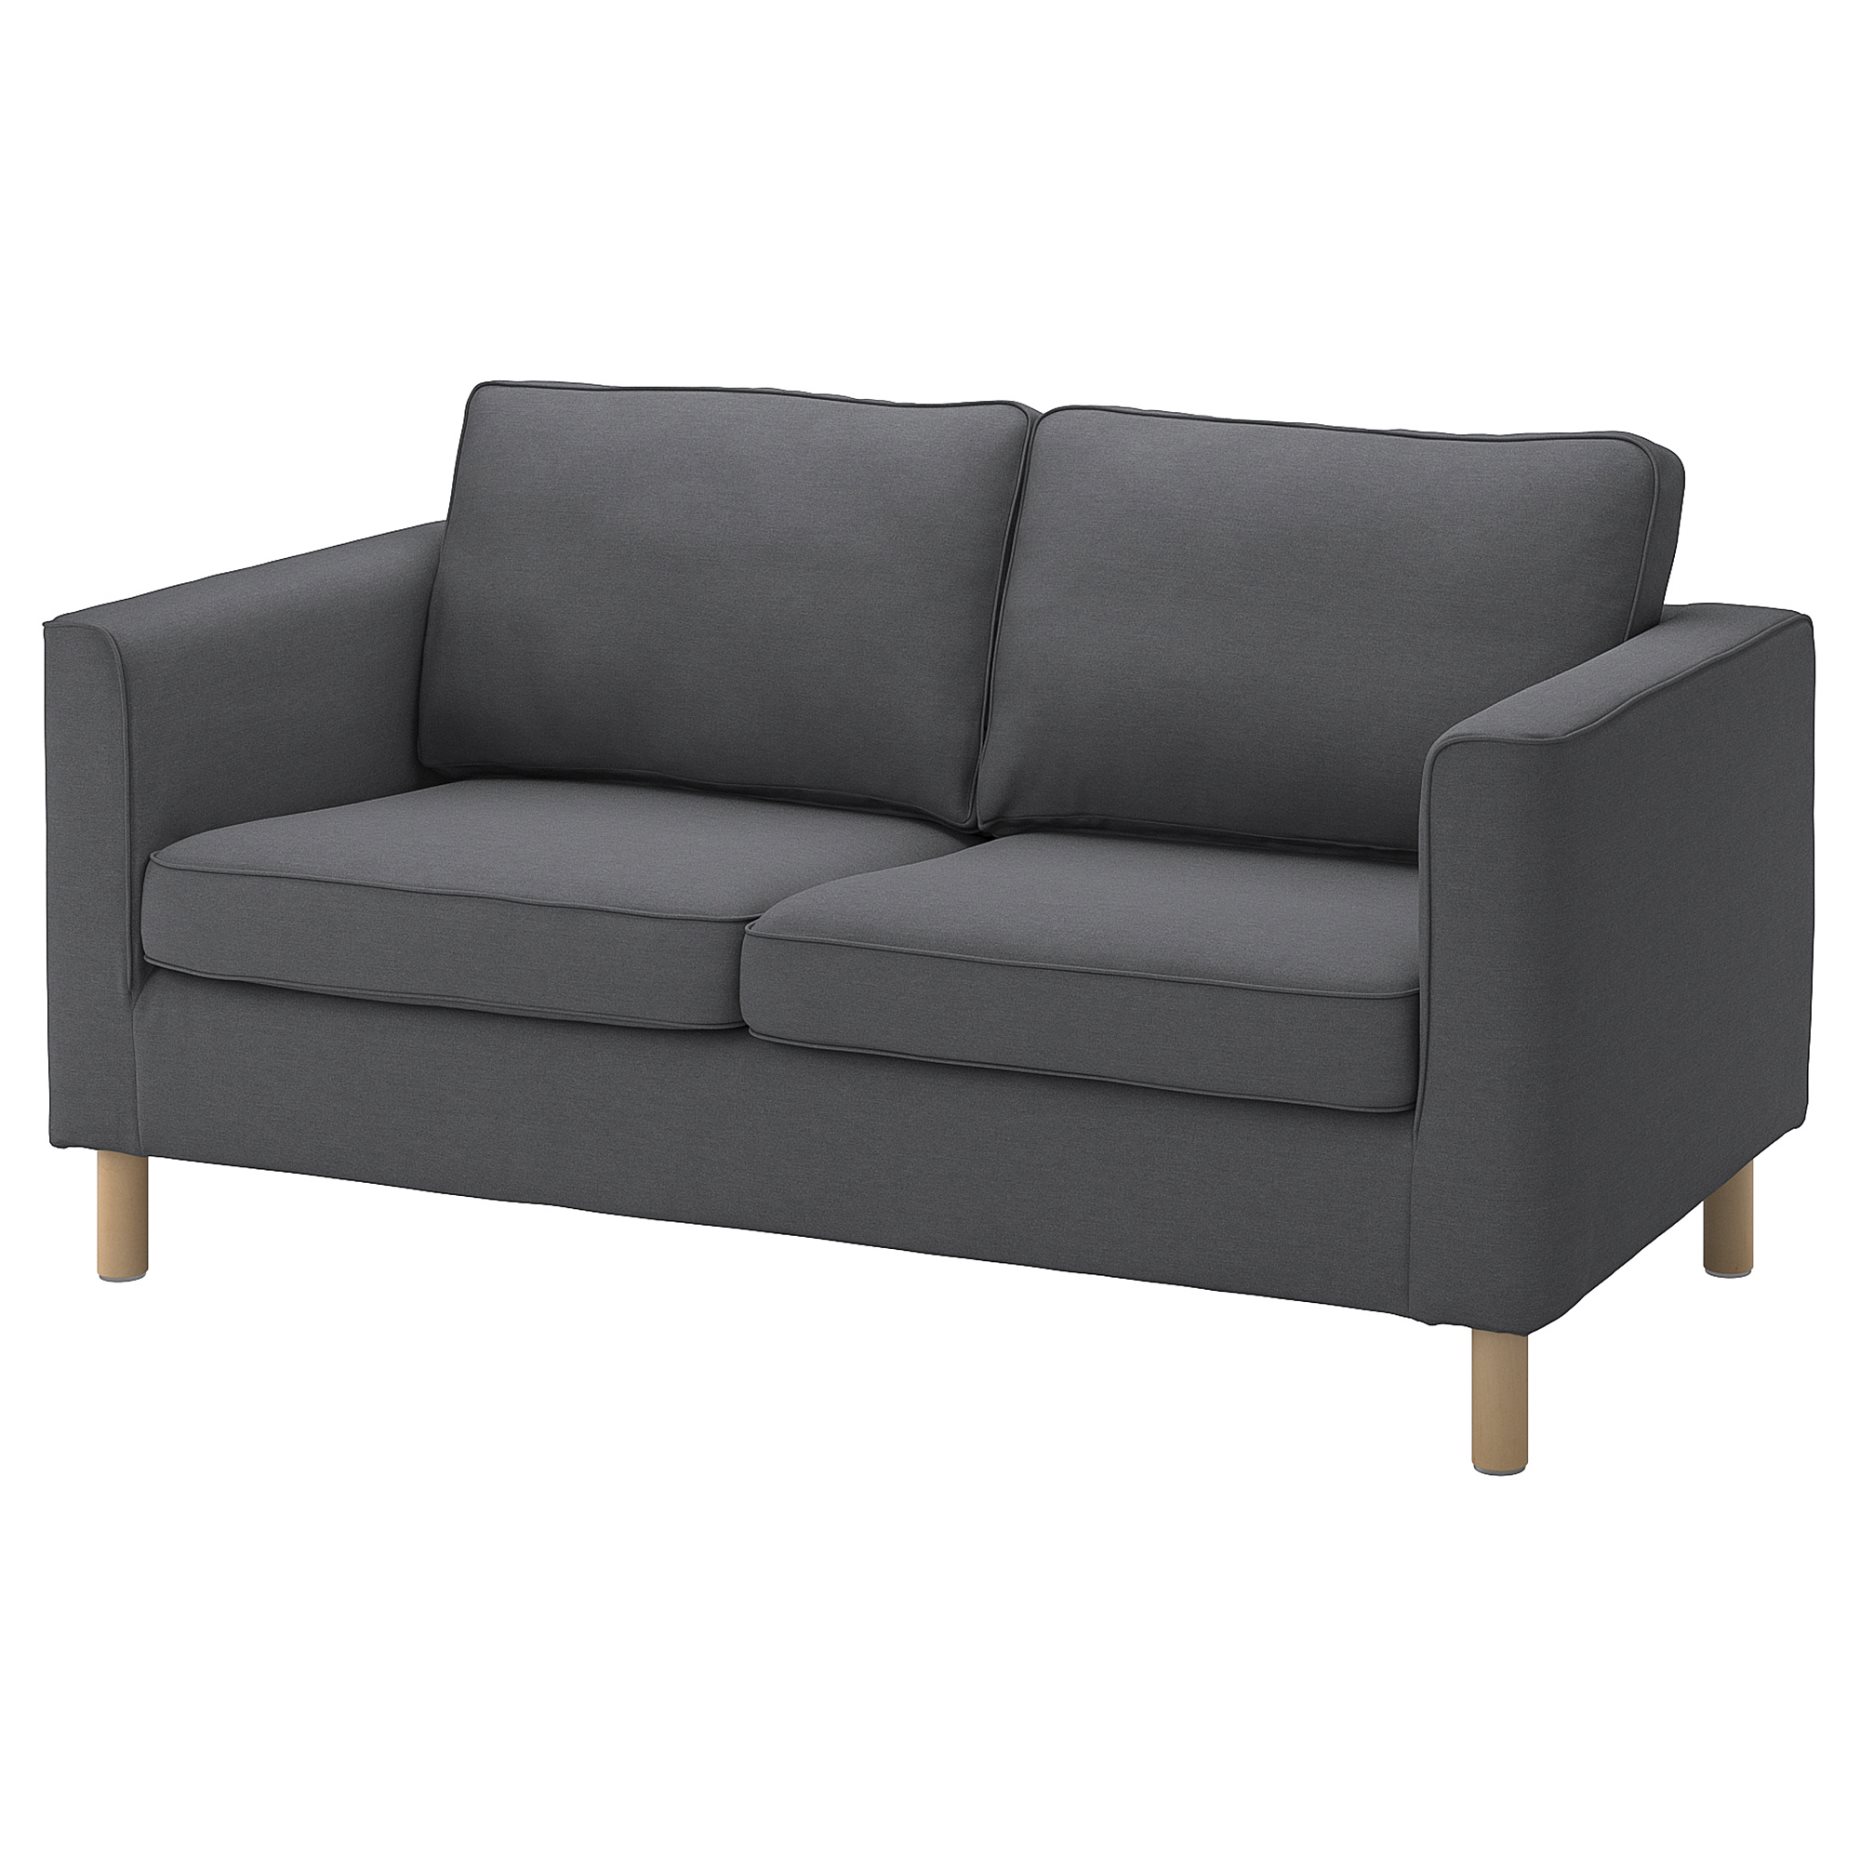 PÄRUP, cover for 2-seat sofa, 804.937.91